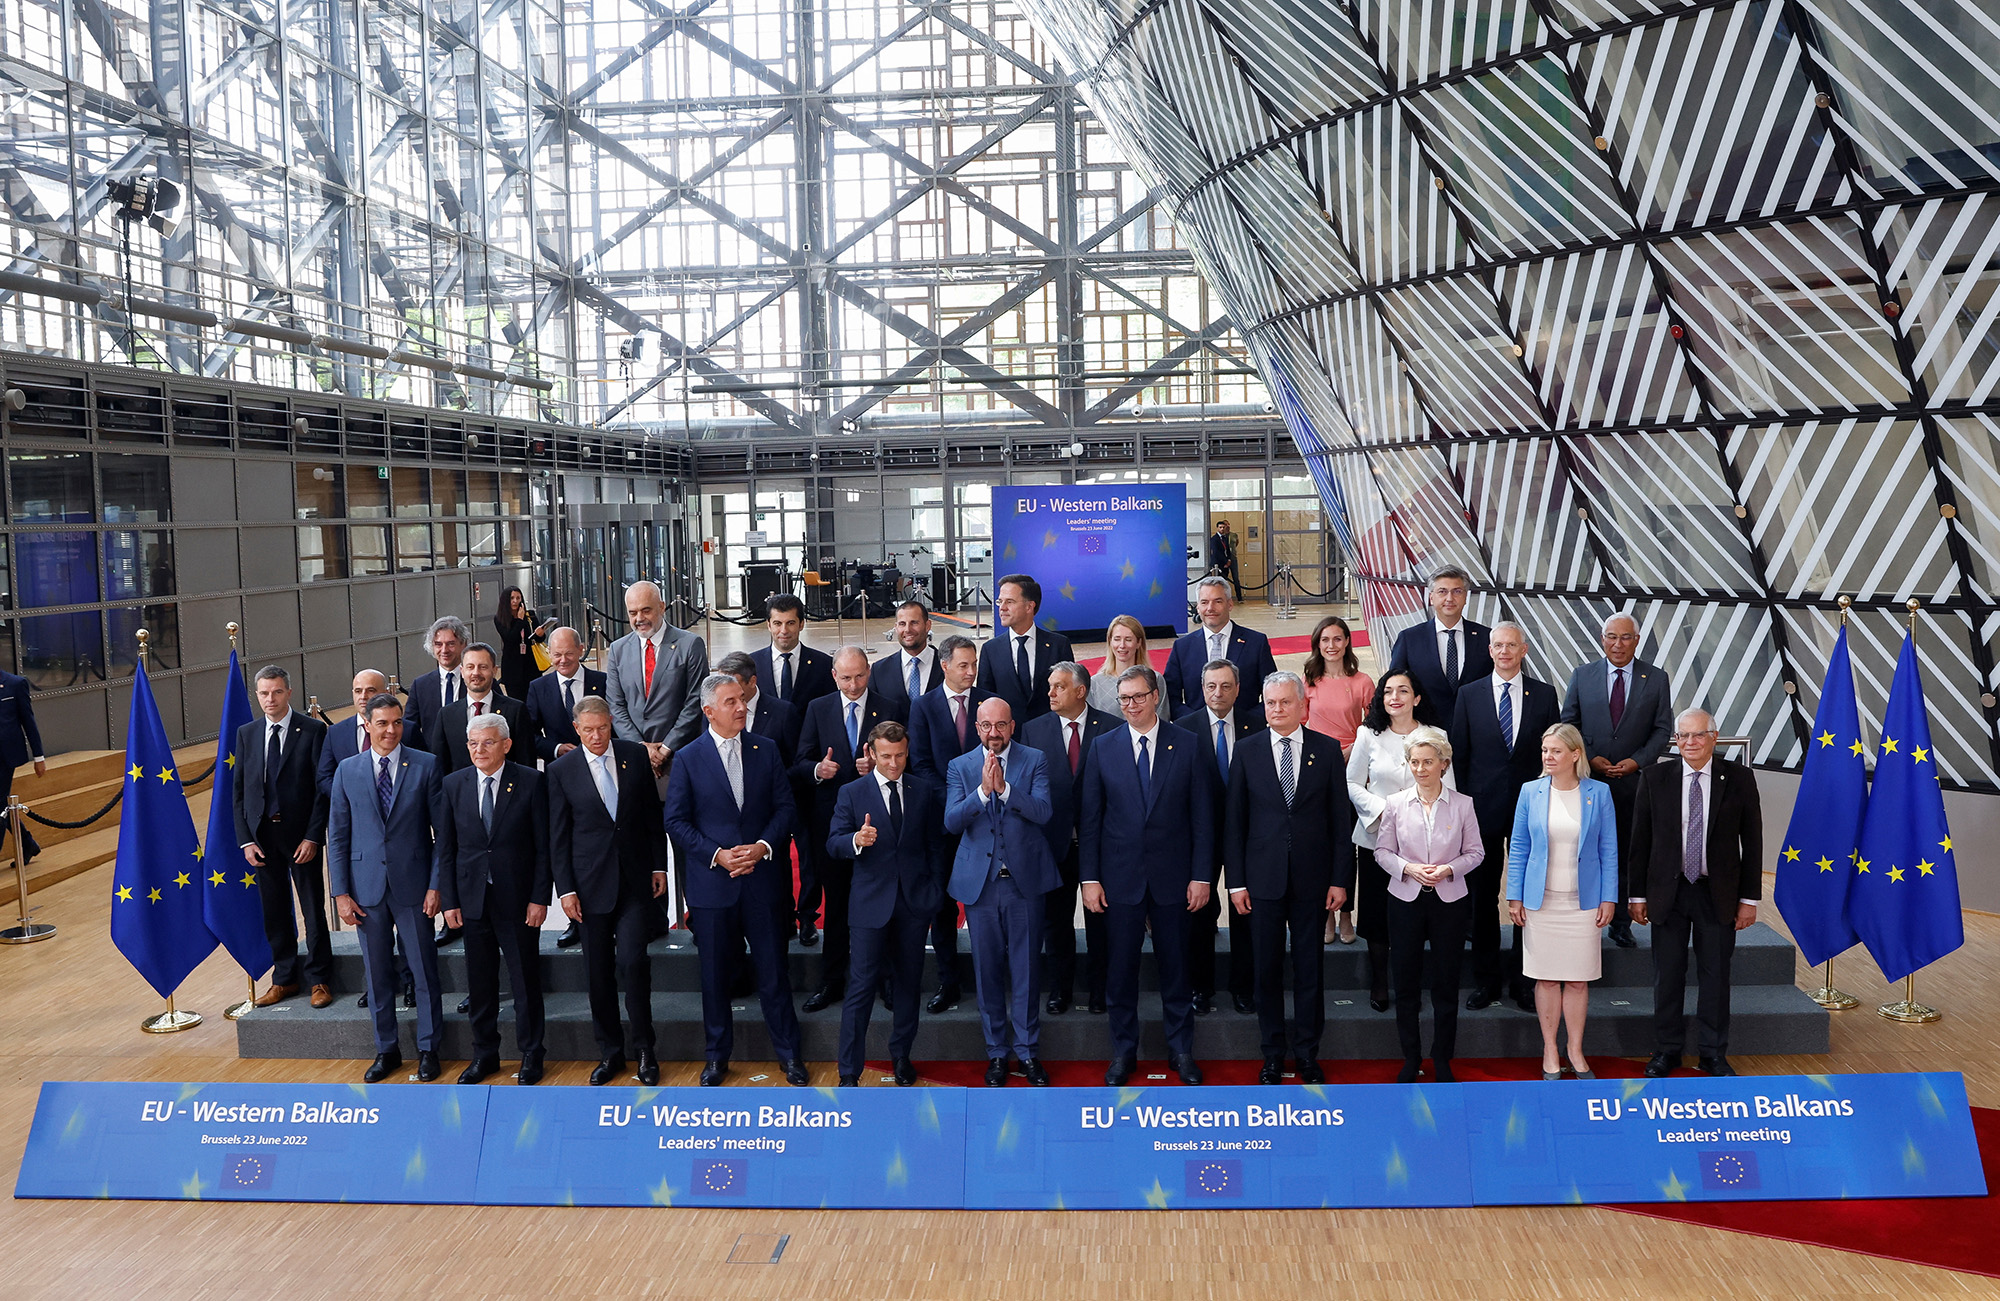 Western Balkans countries leaders and EU leaders pose for a picture at a European Council meeting in Brussels, Belgium, on June 23.